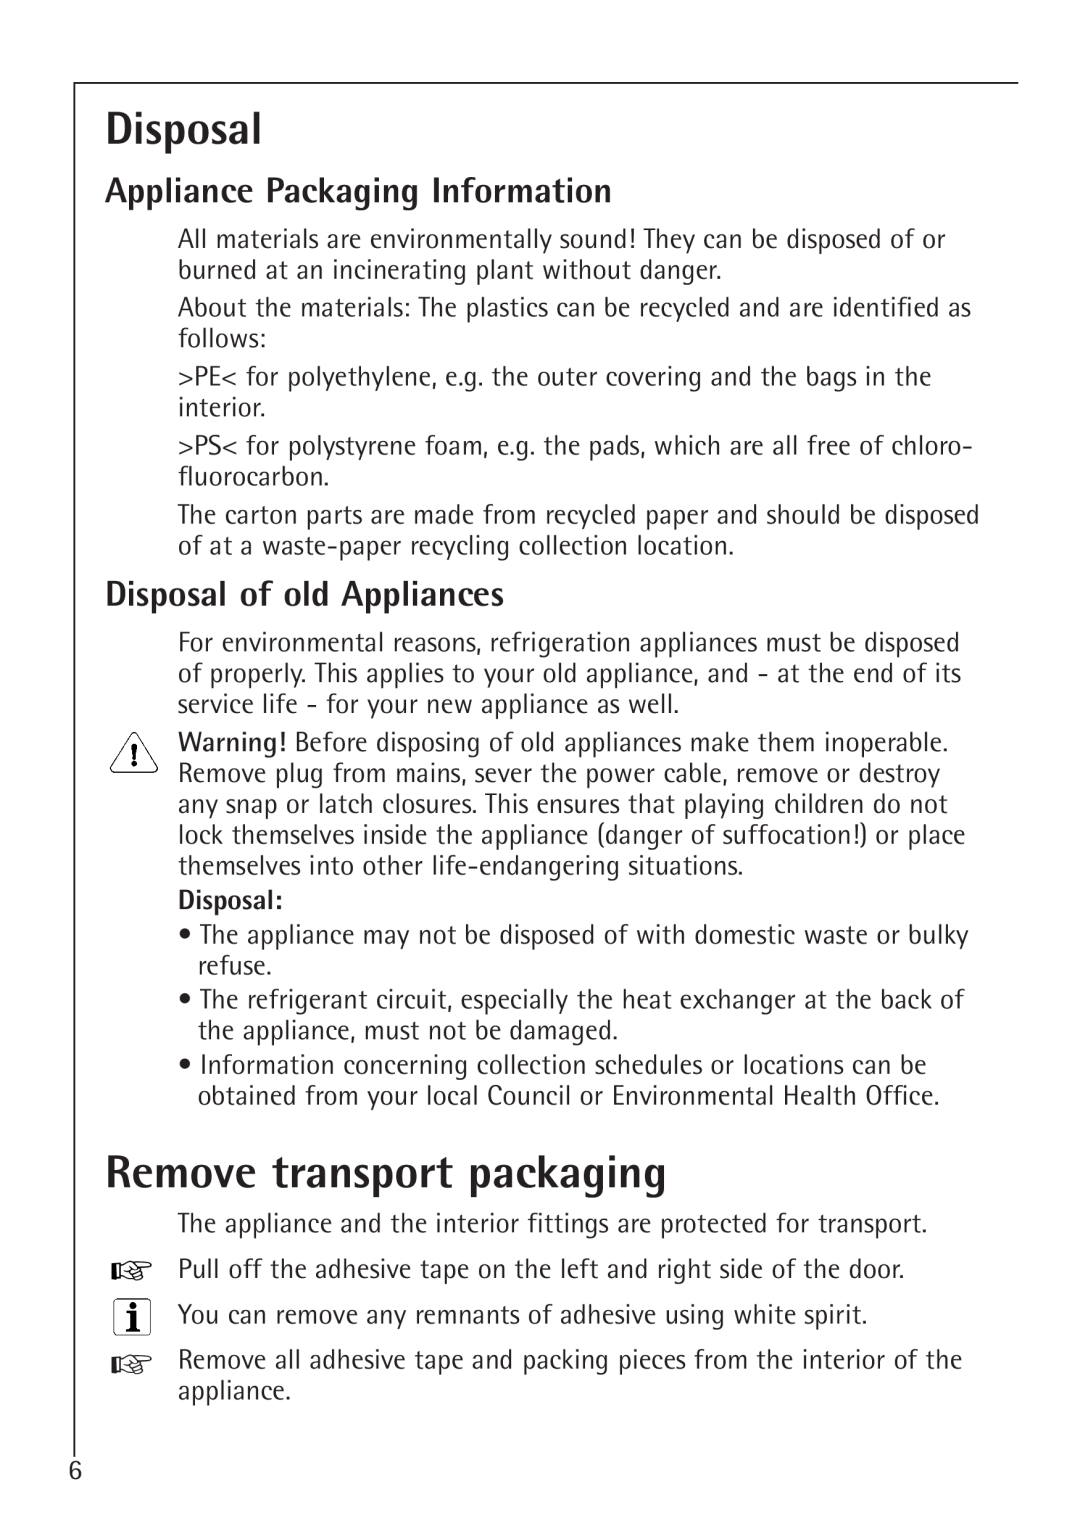 Electrolux 1688-7 TK manual Remove transport packaging, Appliance Packaging Information, Disposal of old Appliances 